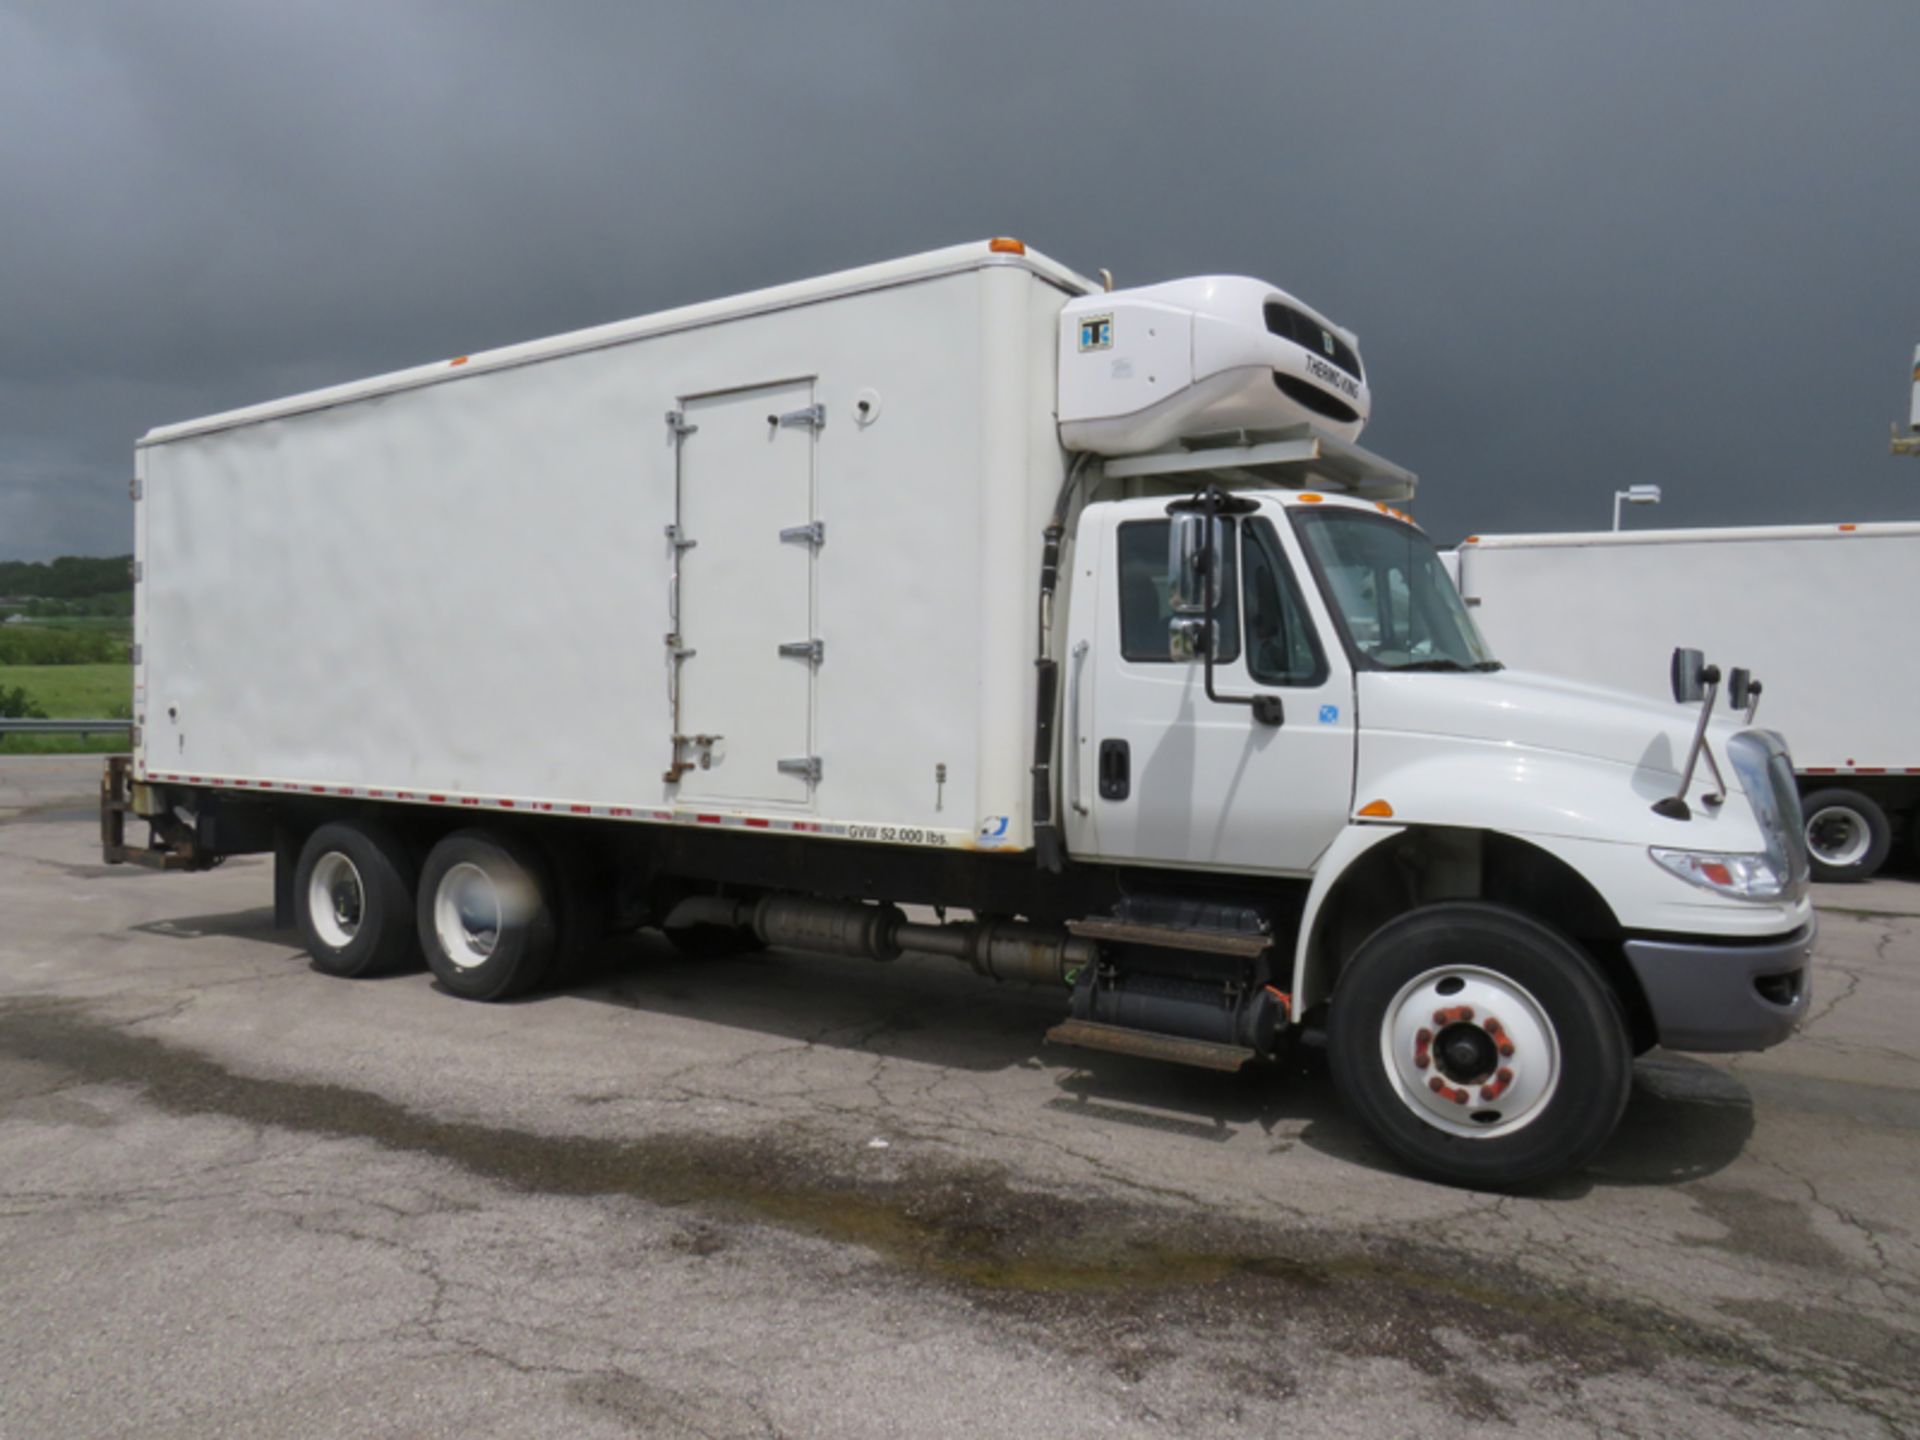 2018 INTERNATIONAL 4400 SBA 6X4 REFRIGERATED BOX TRUCK VIN#: 1HTMSTAR0JH529562, Approx Miles: 40014, - Image 3 of 9